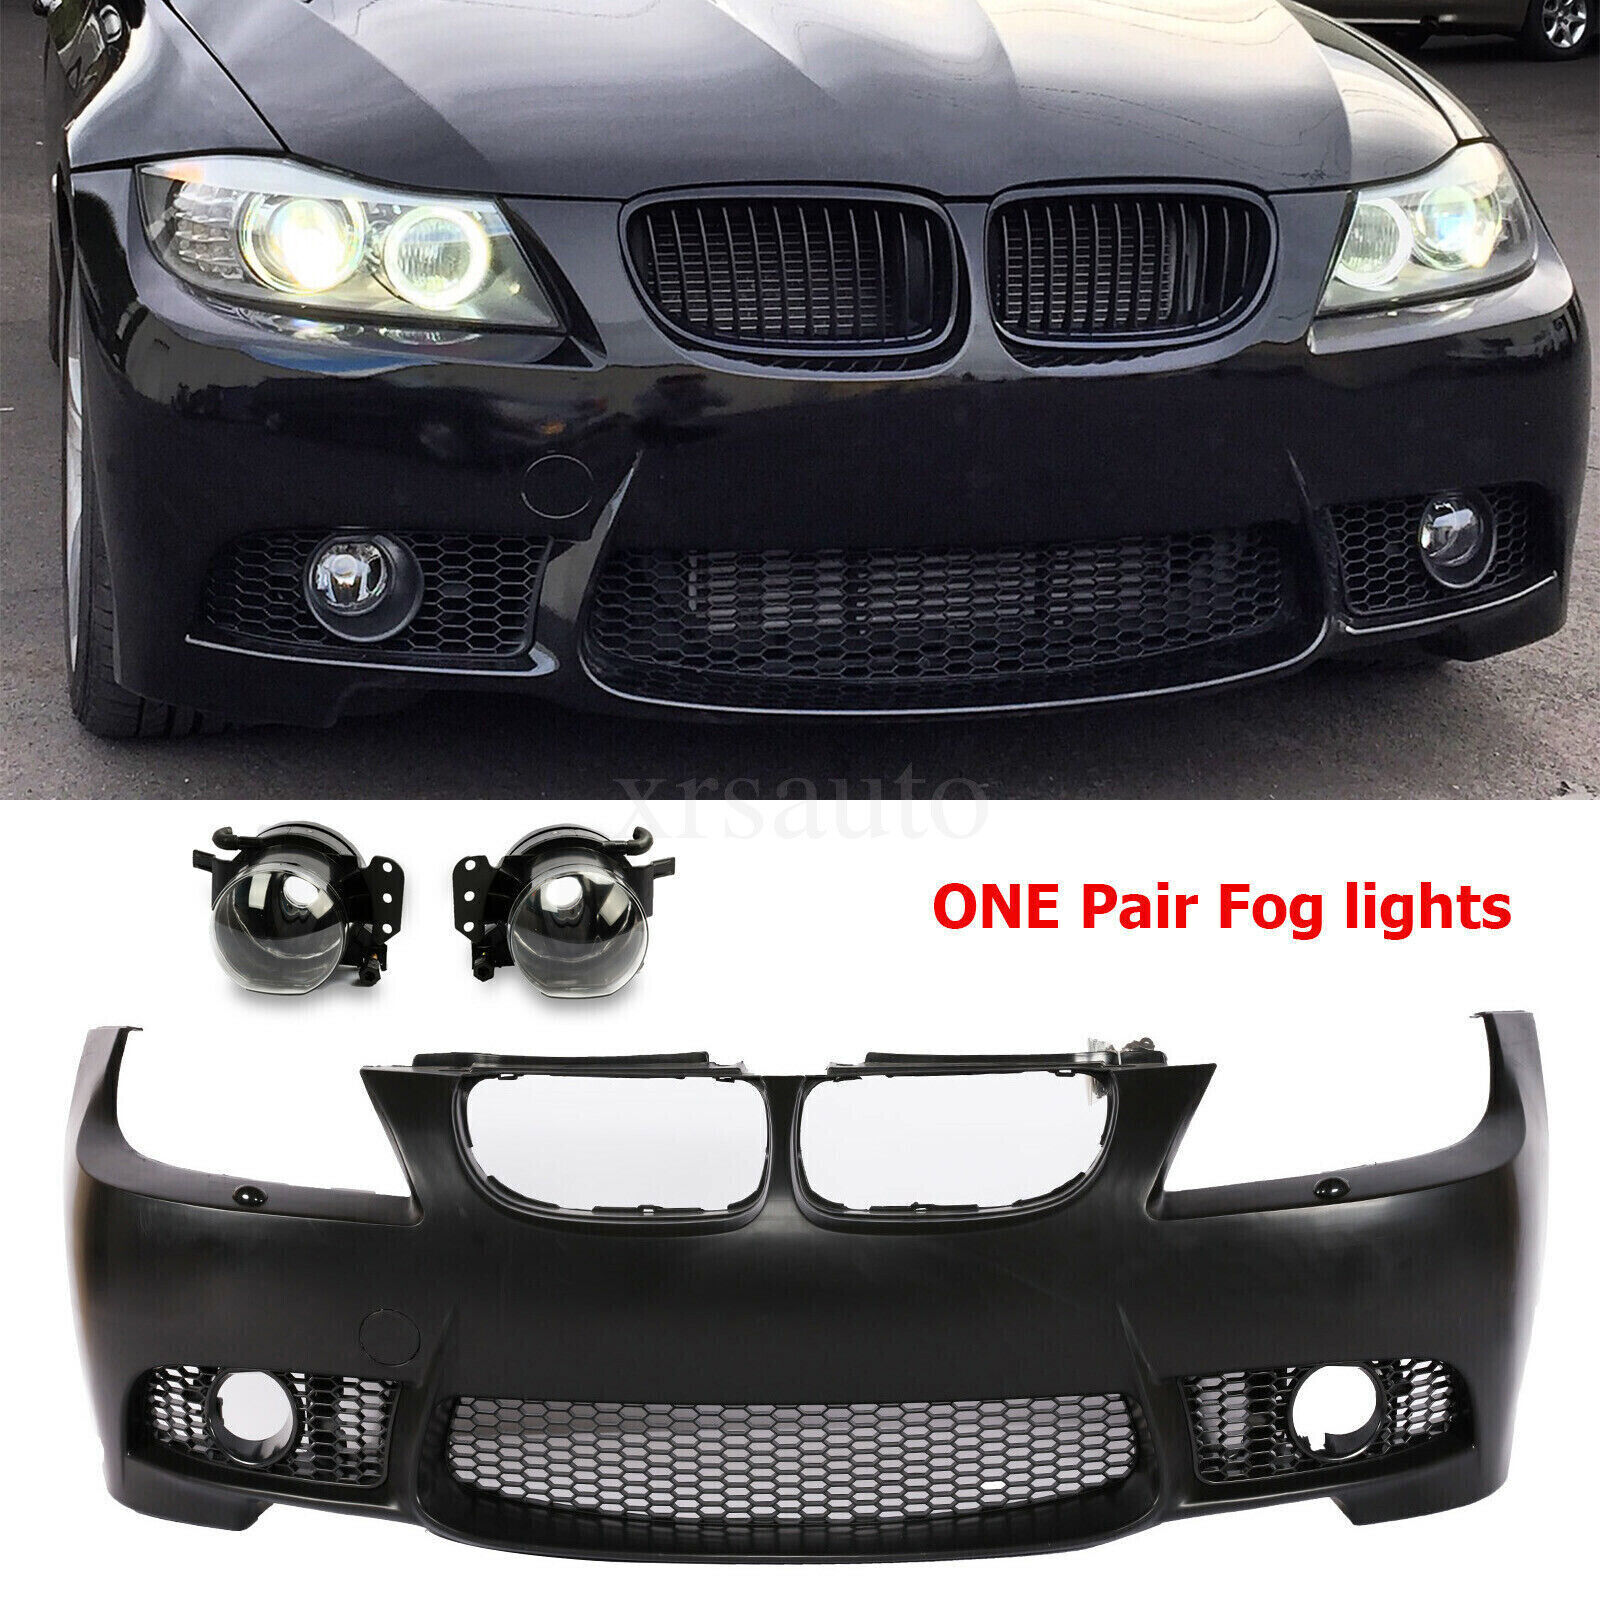 M3 Style Front Bumper Fit for 09-11 BMW E90 E91 4dr 3-Series + Glass Fog lights